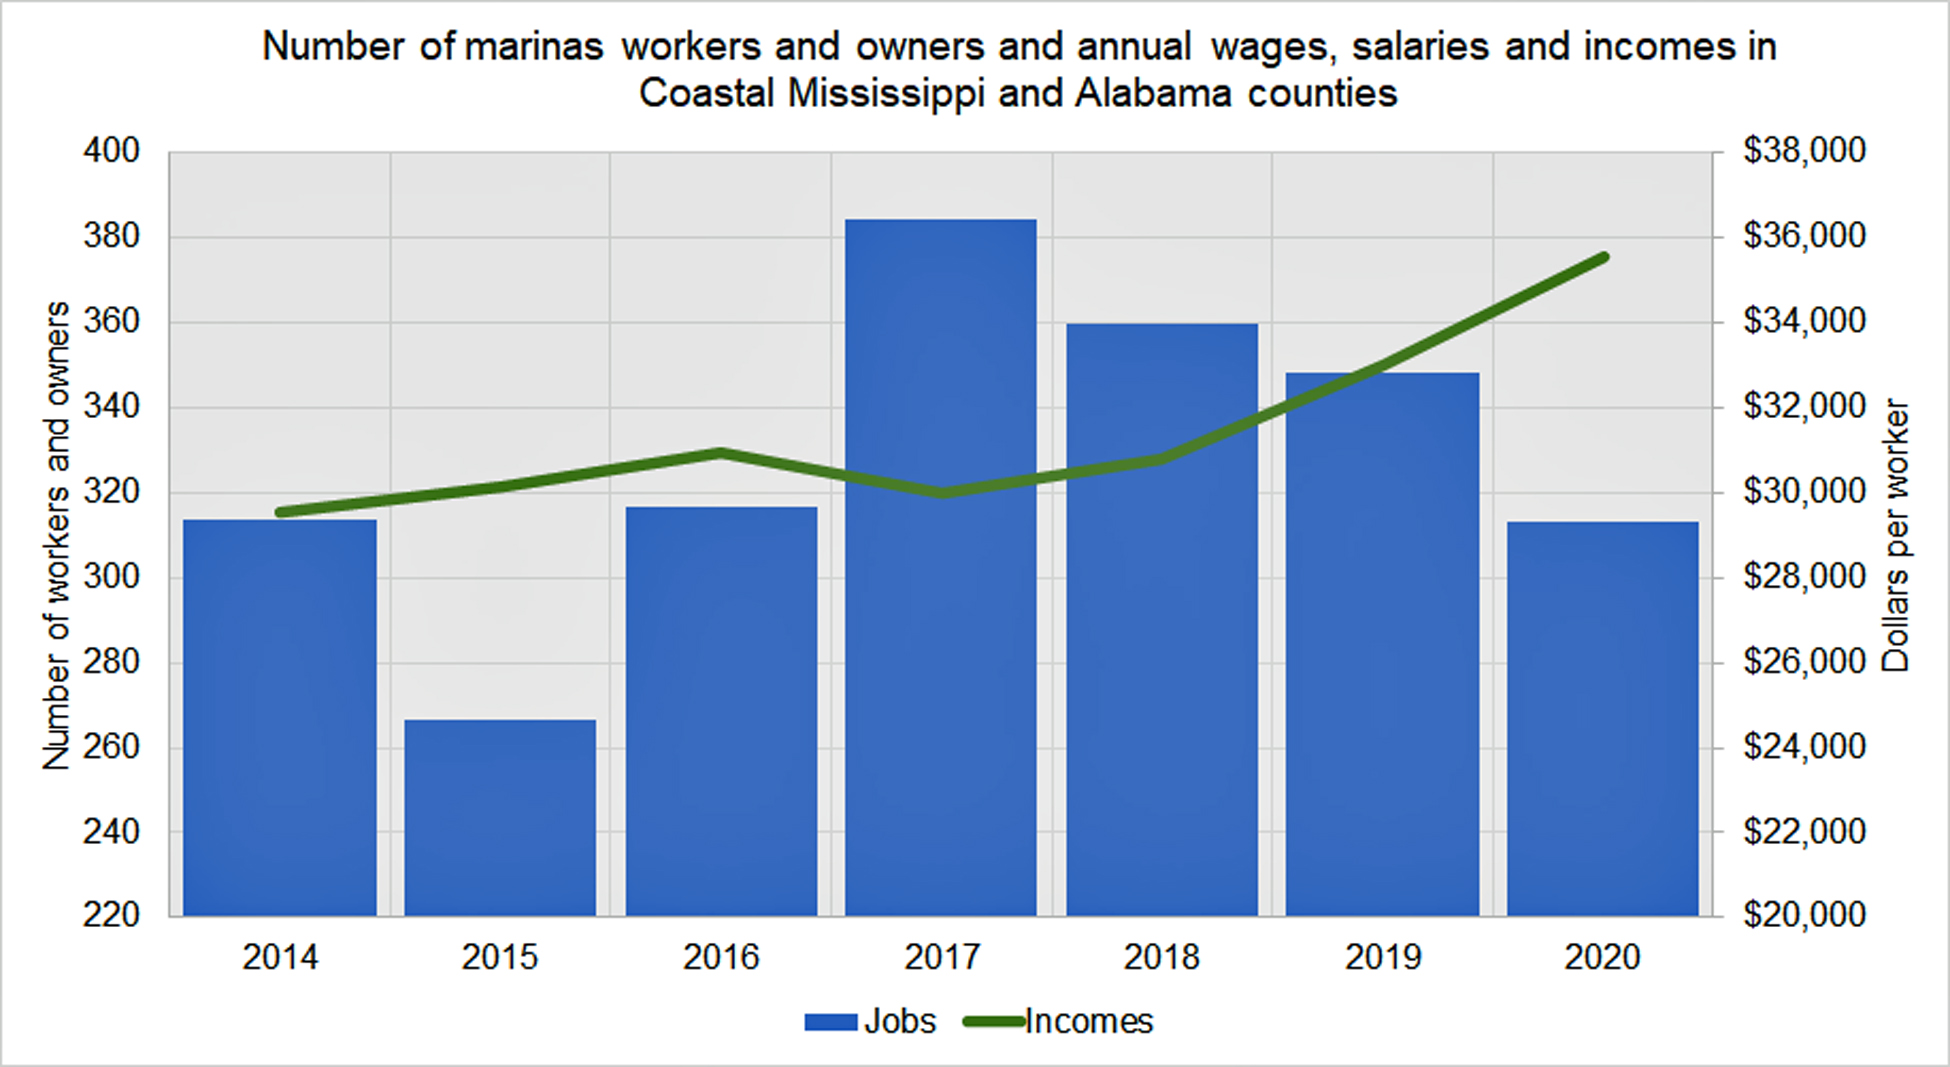 number_of_workers_and_owners_of_marinas_in_coastal_ms_and_al.jpg